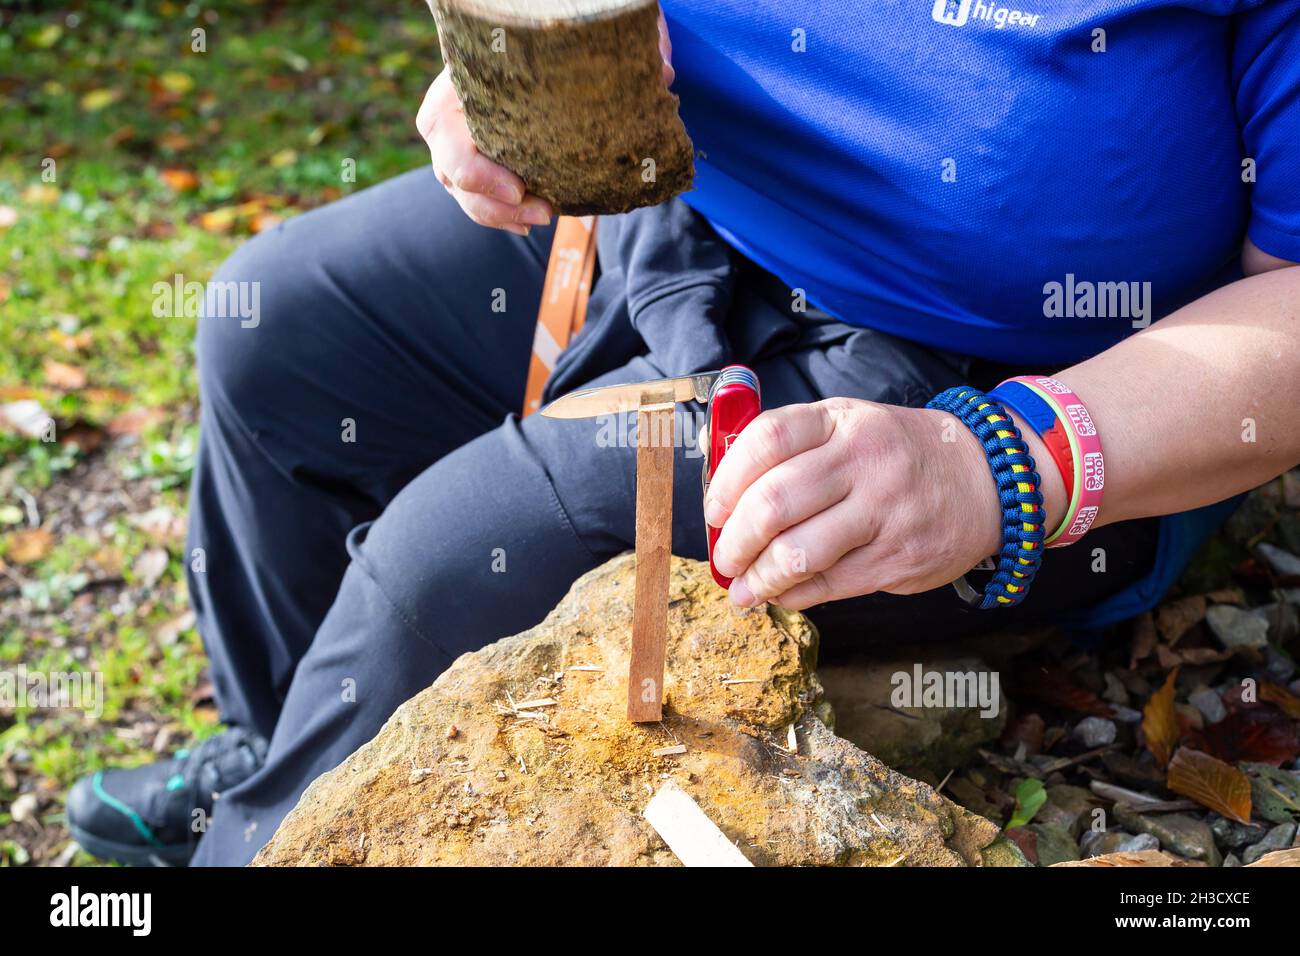 Camping, Survival skills, Fire, cooking, orienteering, ropes knots, making kindling Stock Photo